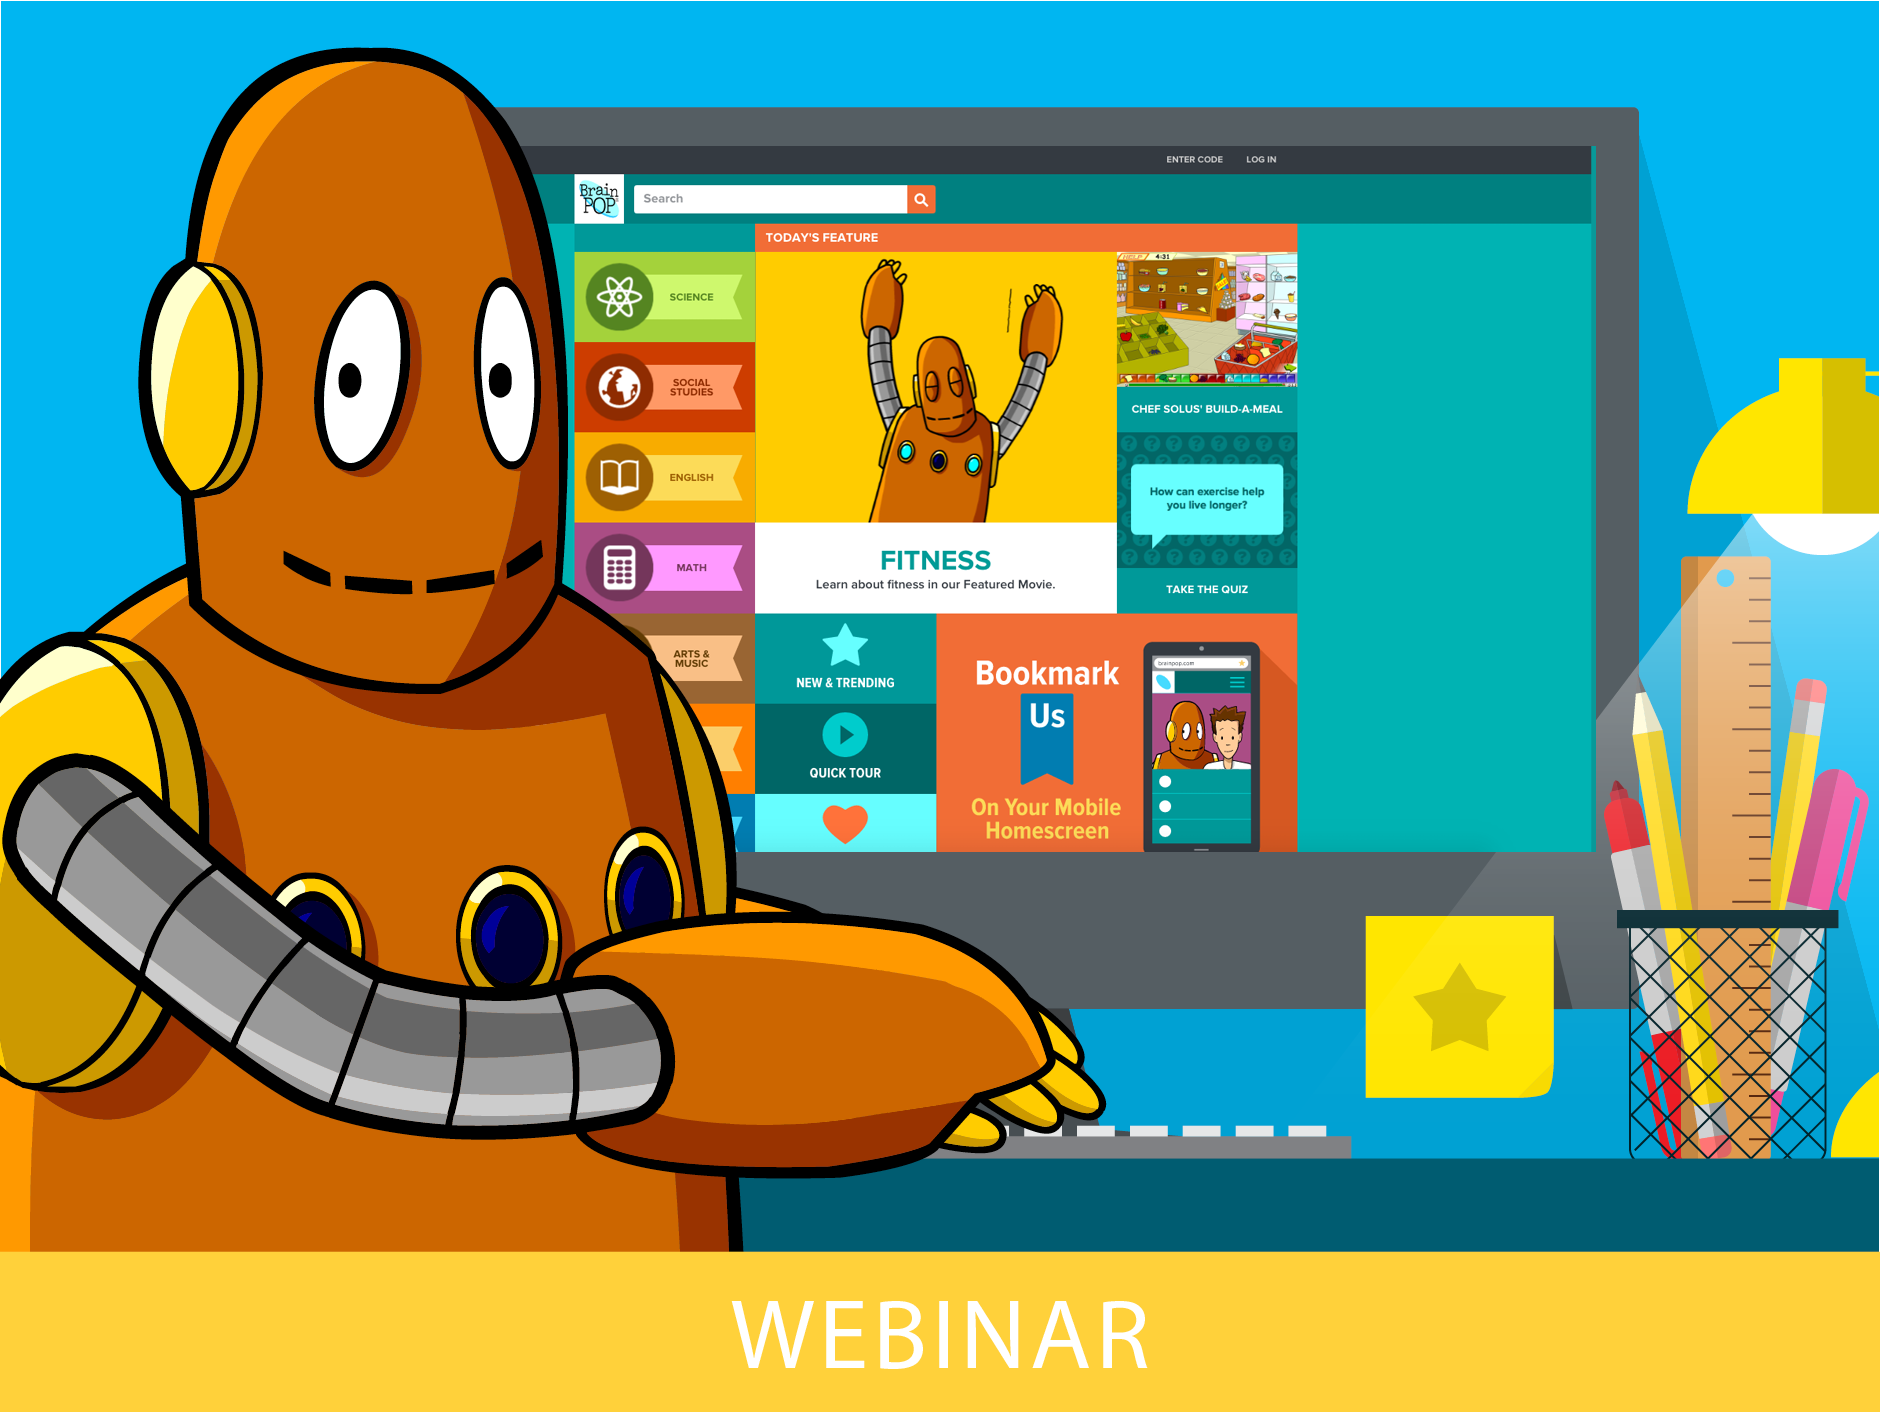 Explanations and Creations With BrainPOP